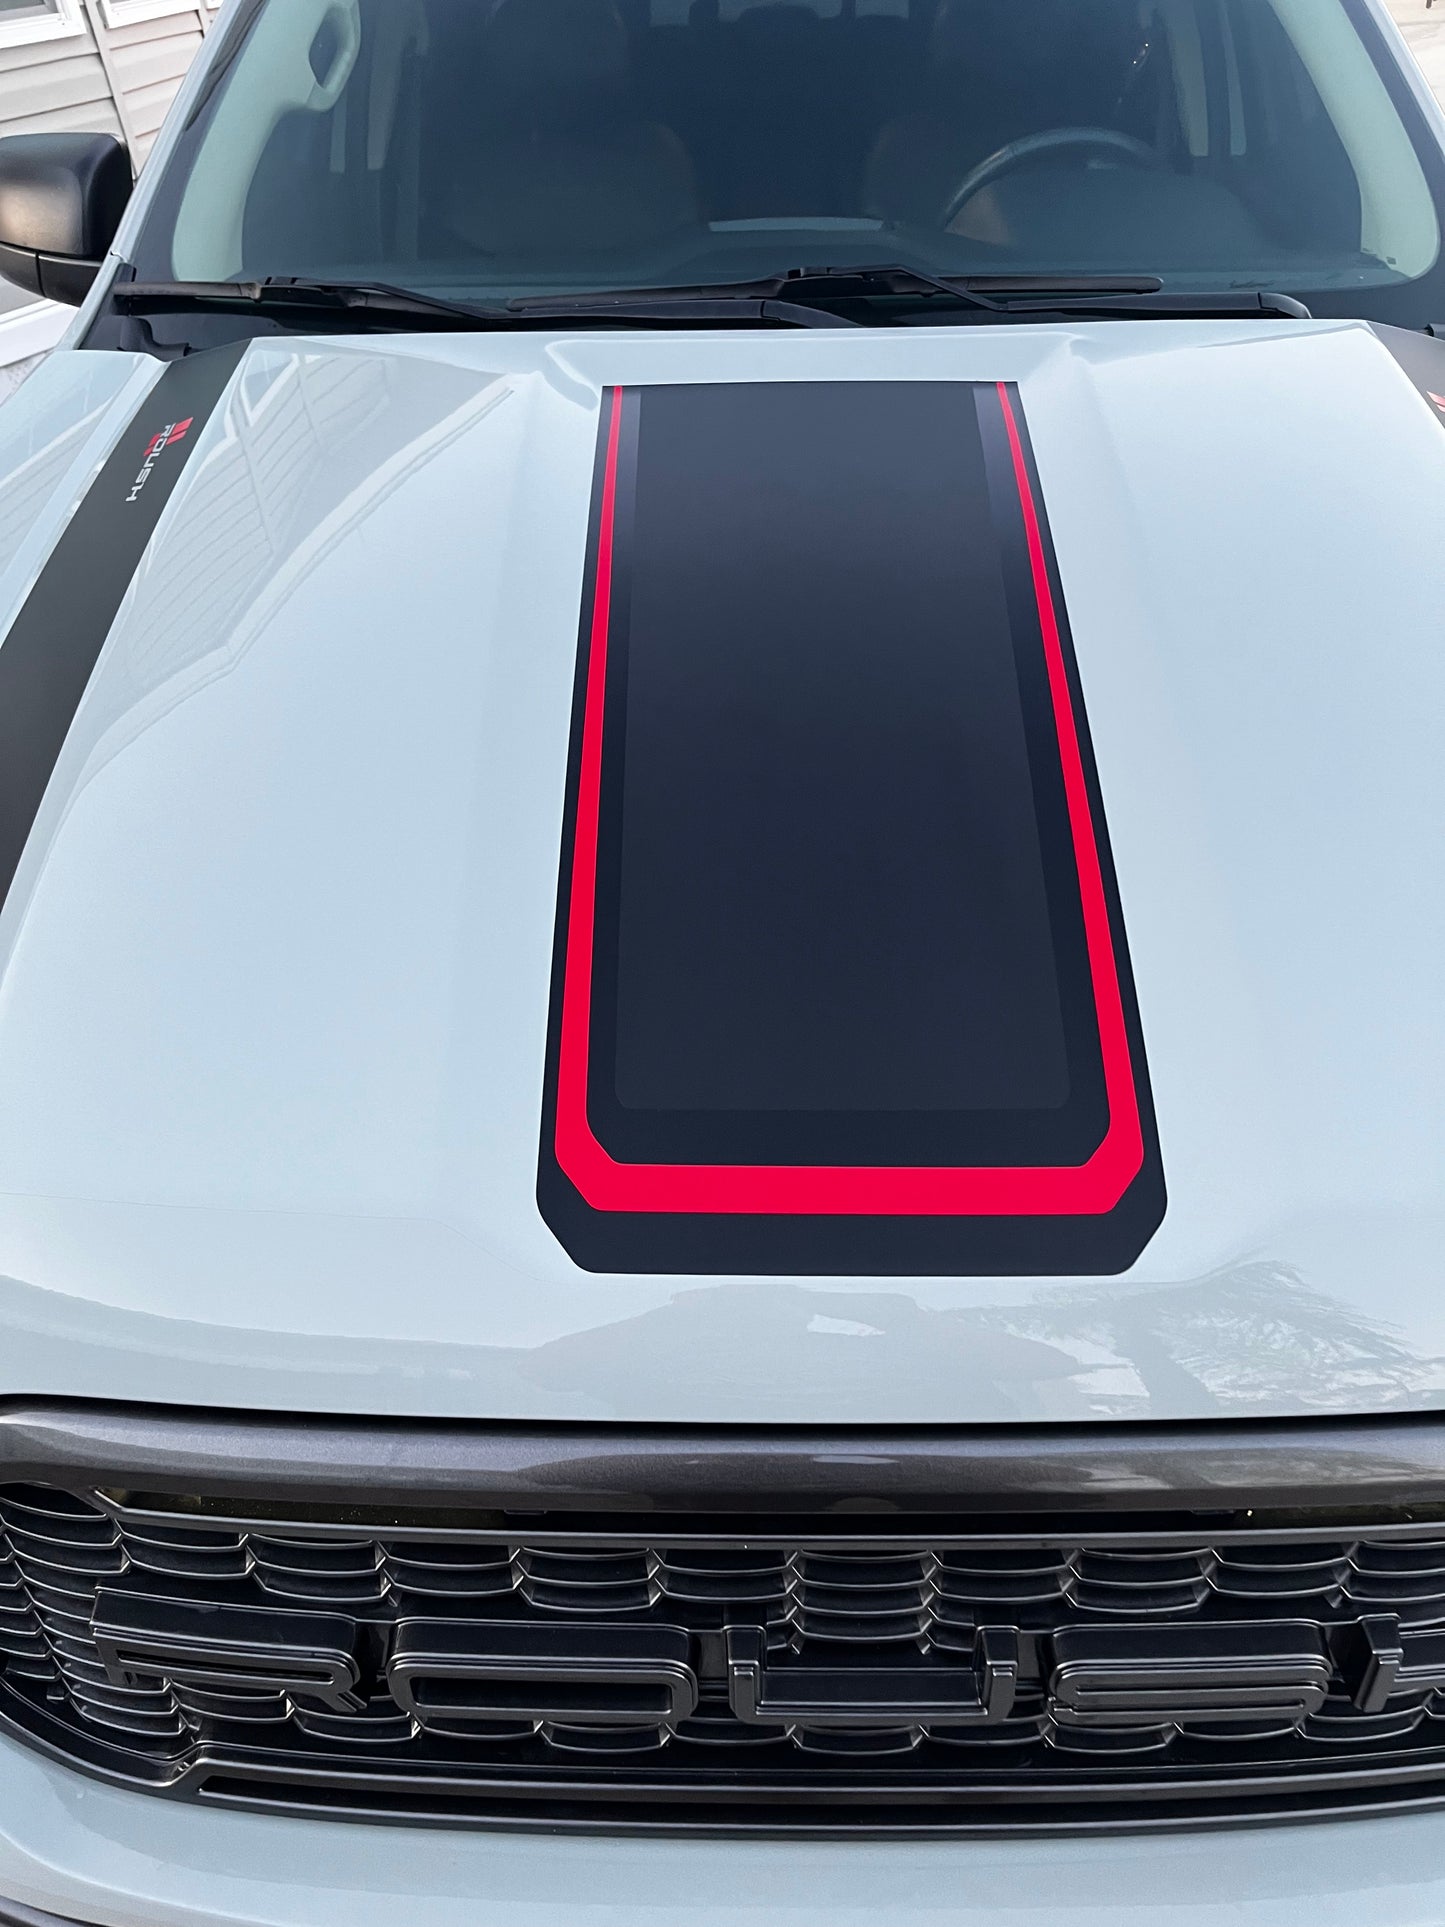 Ford Ranger Mach 1 Inspired Hood Decal- 3 Layer Decal (3 Pieces)